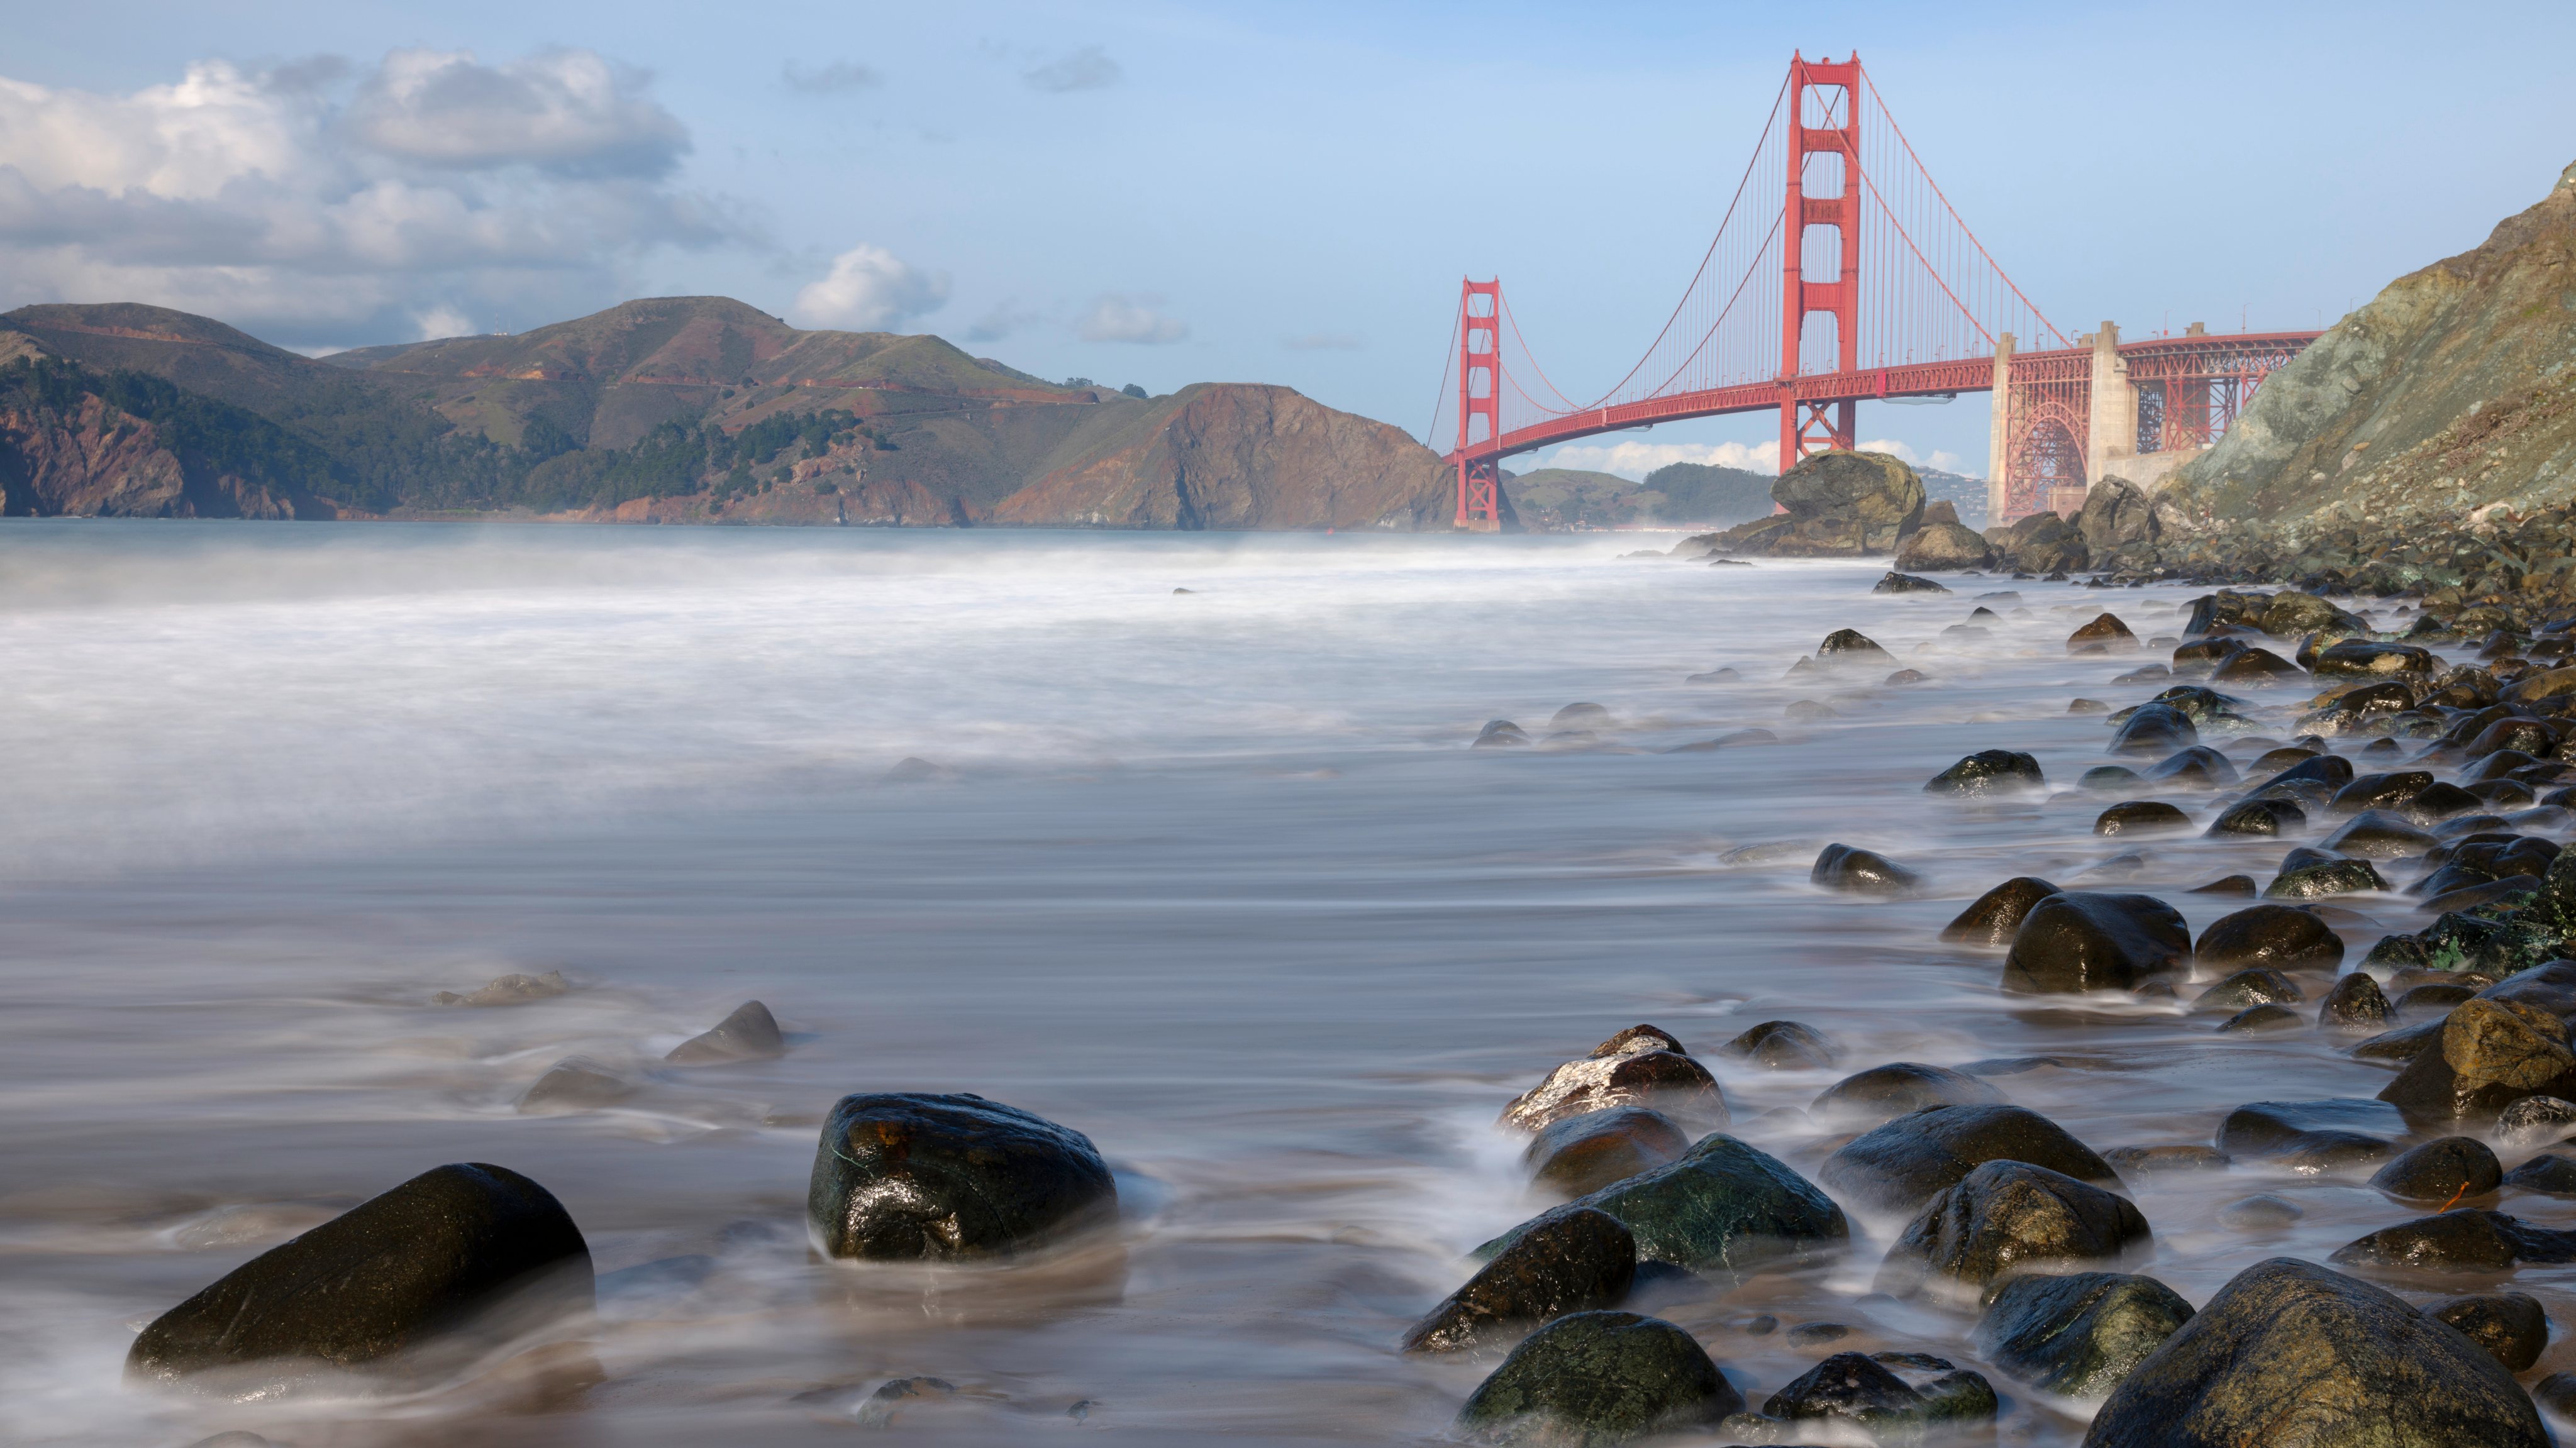 The Golden Gate Bridge in San Francisco viewed from Marshall&#039;s Beach